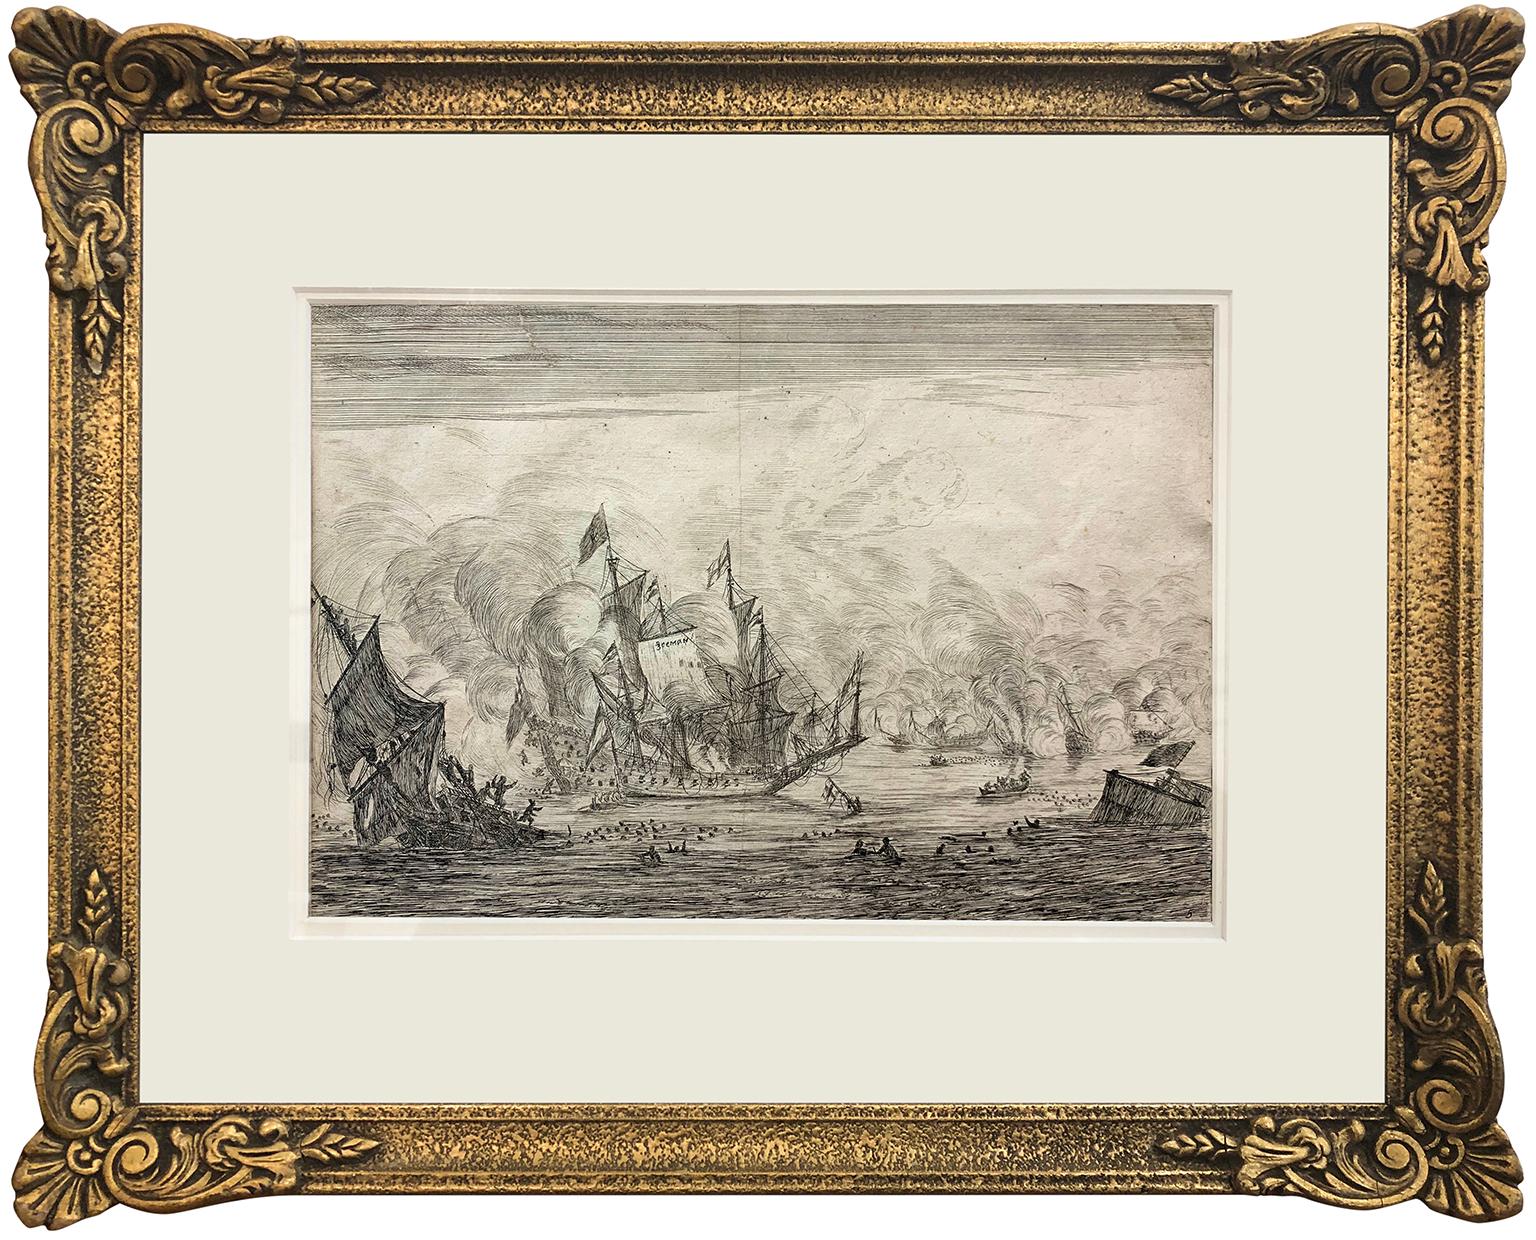   Navel Battle with an English Ship. Foundering on the Left, from Naval Battle - Print by Reinier Nooms Zeeman